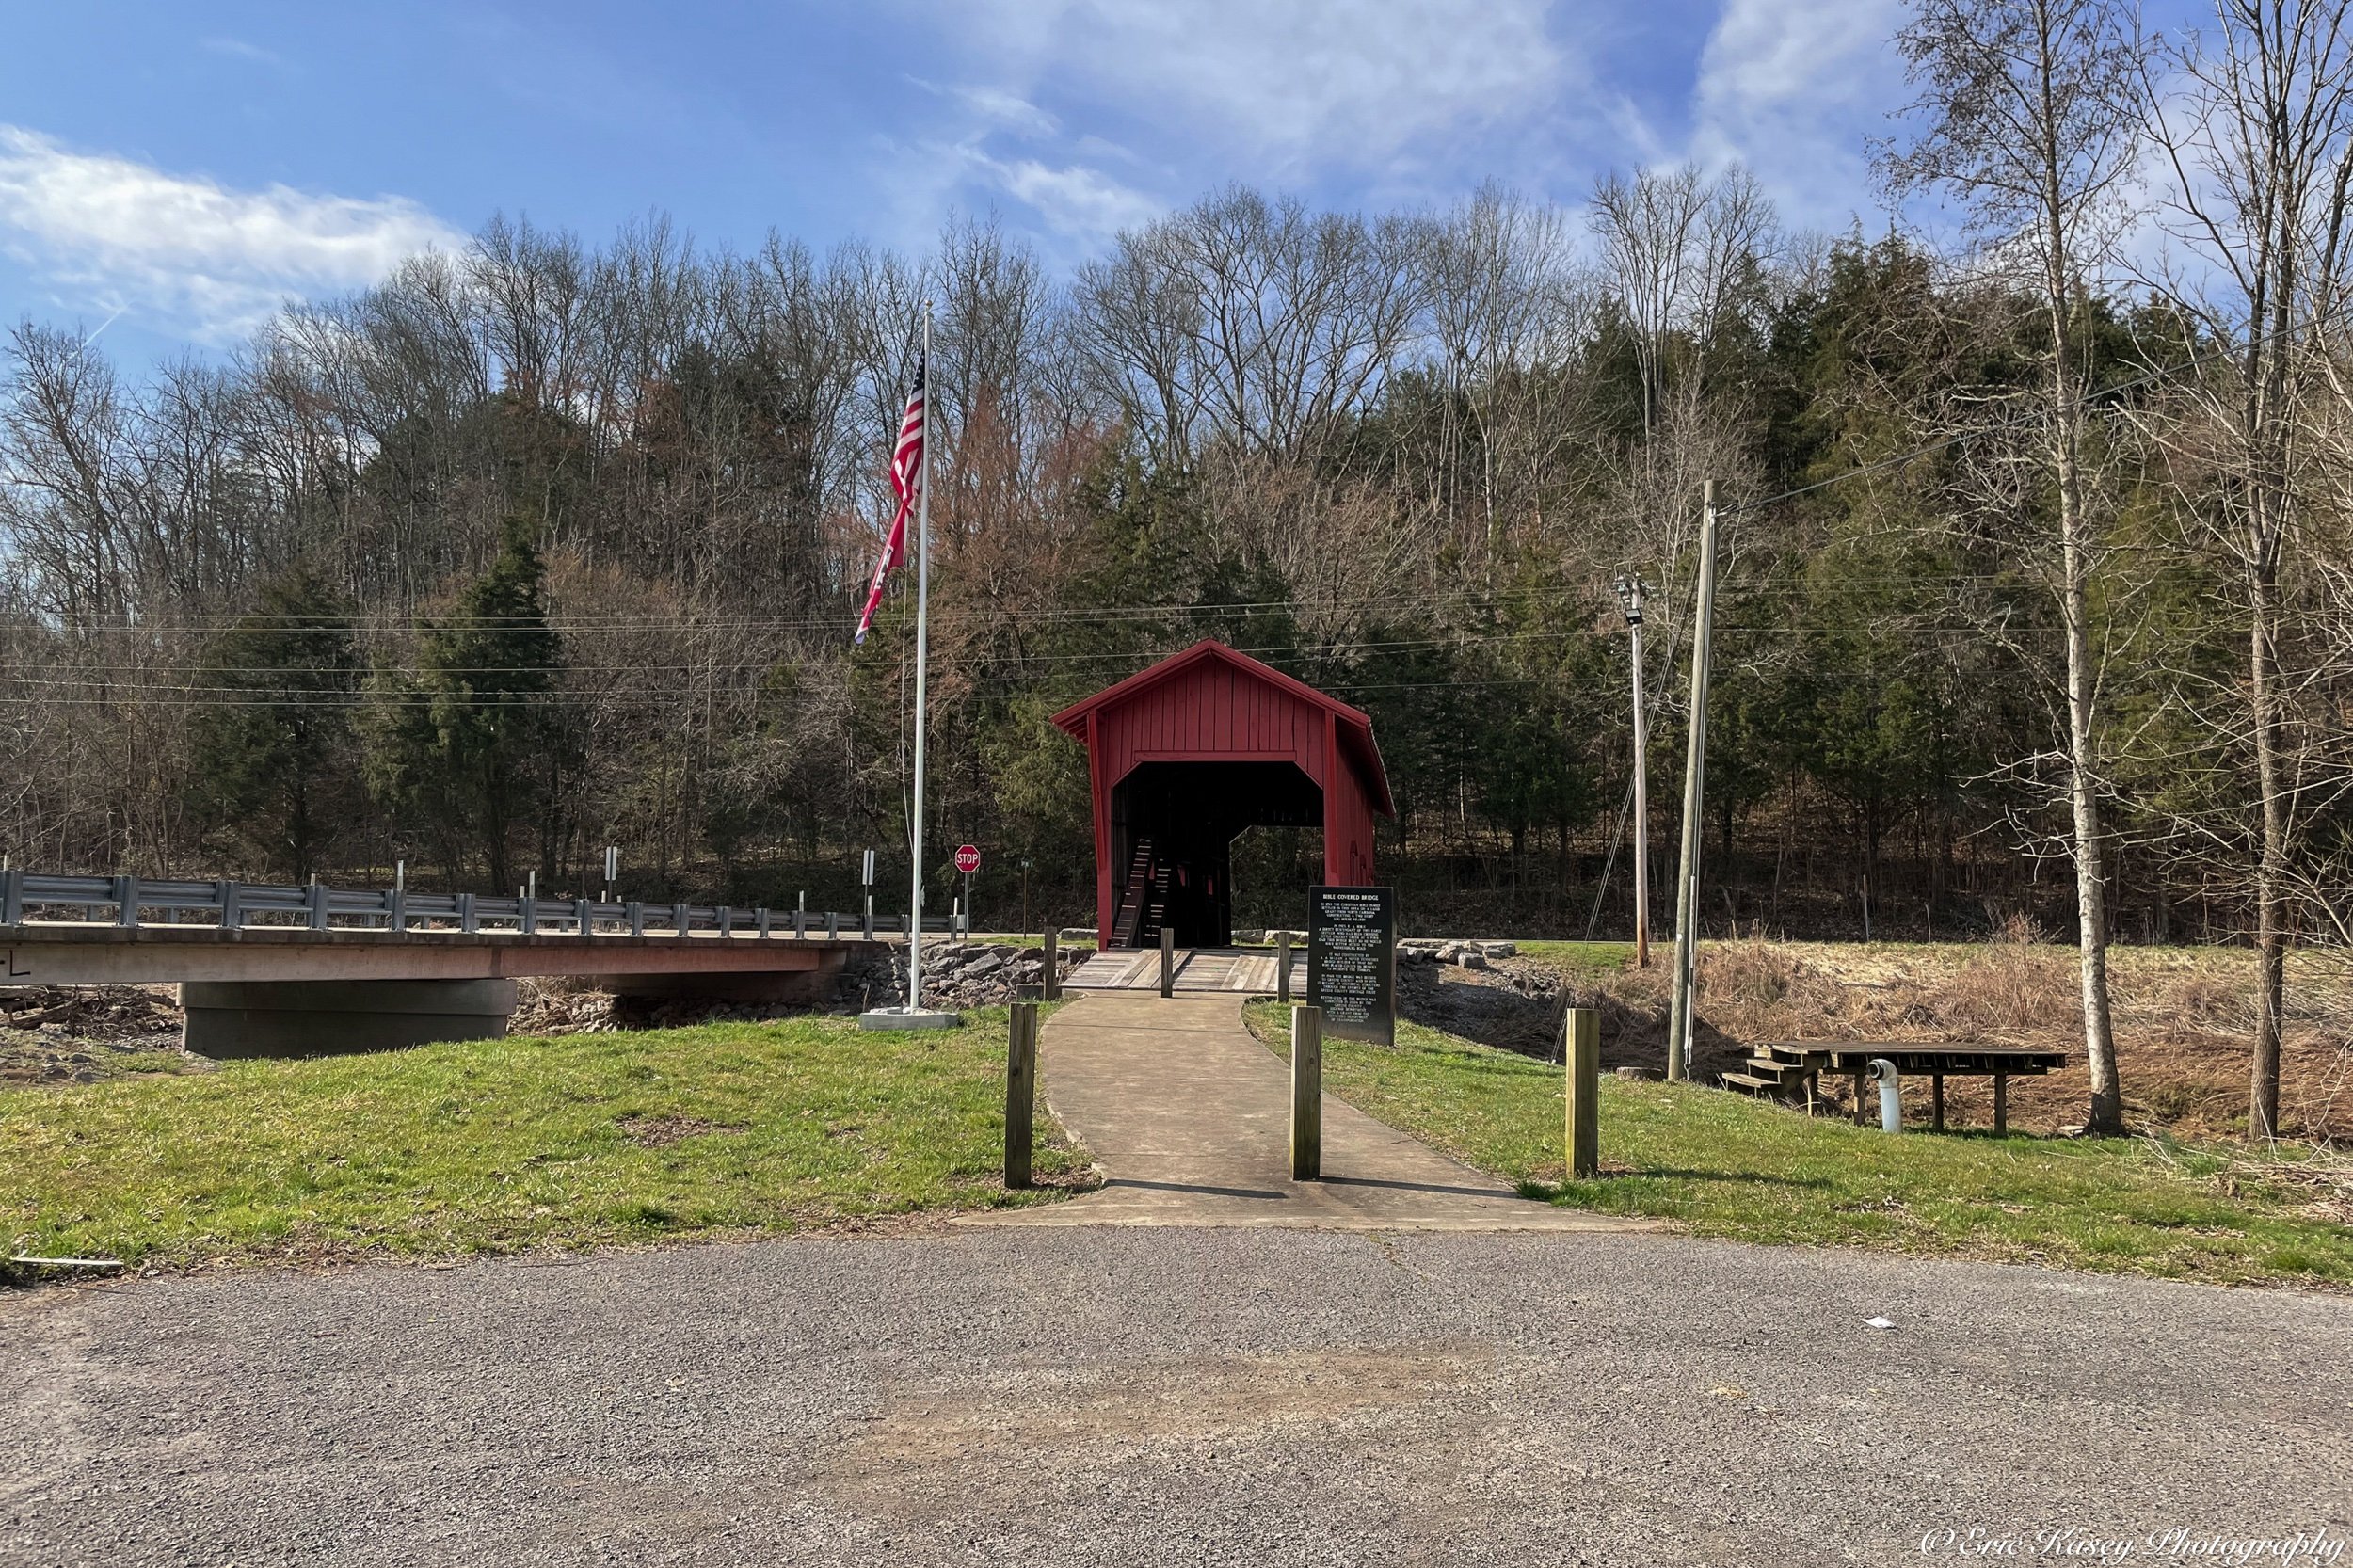 Bible Covered Bridge of Liberty Hill, TN on March 5th, 2022.jpeg